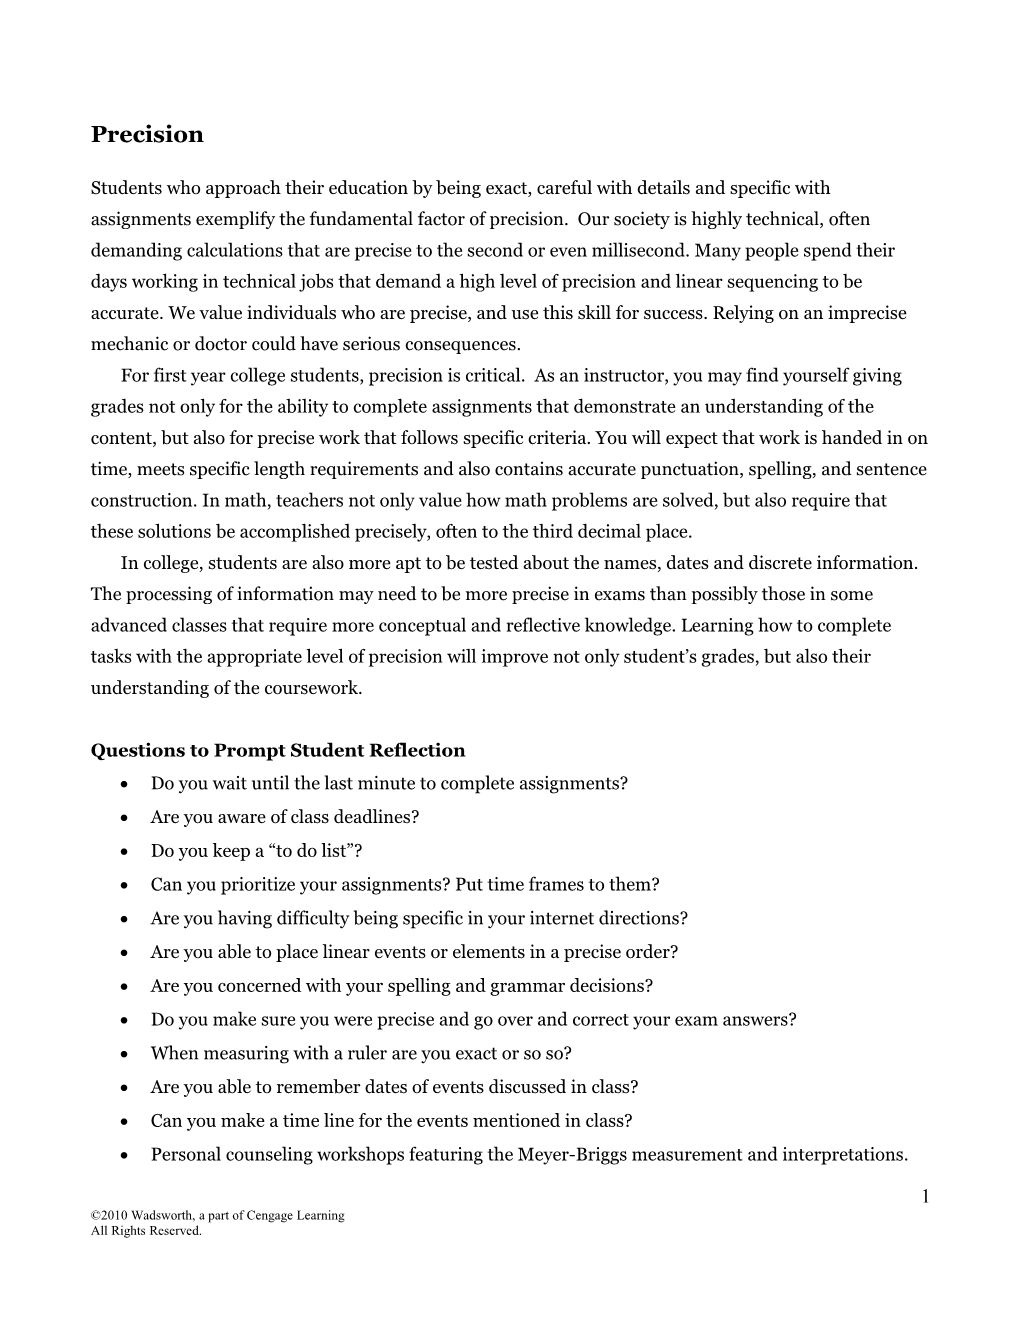 Questions to Prompt Student Reflection